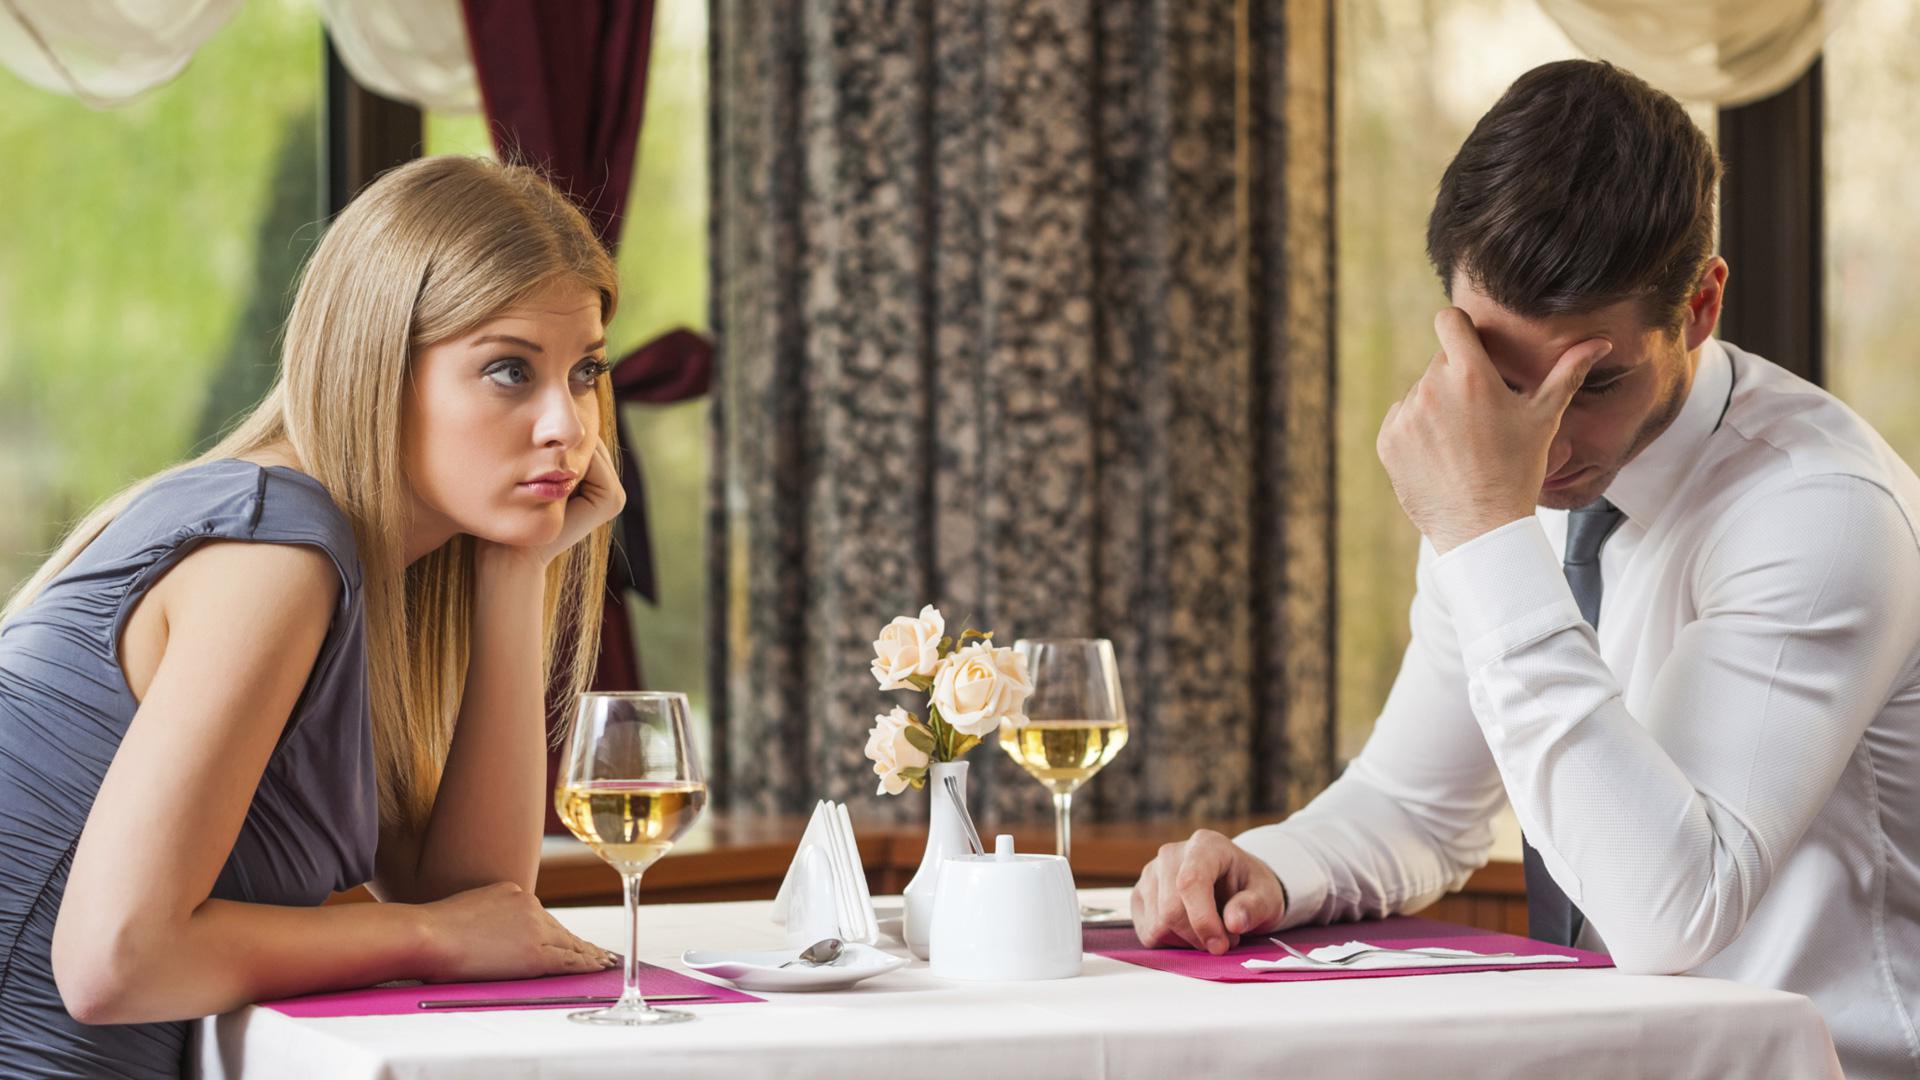 how to behave during first date